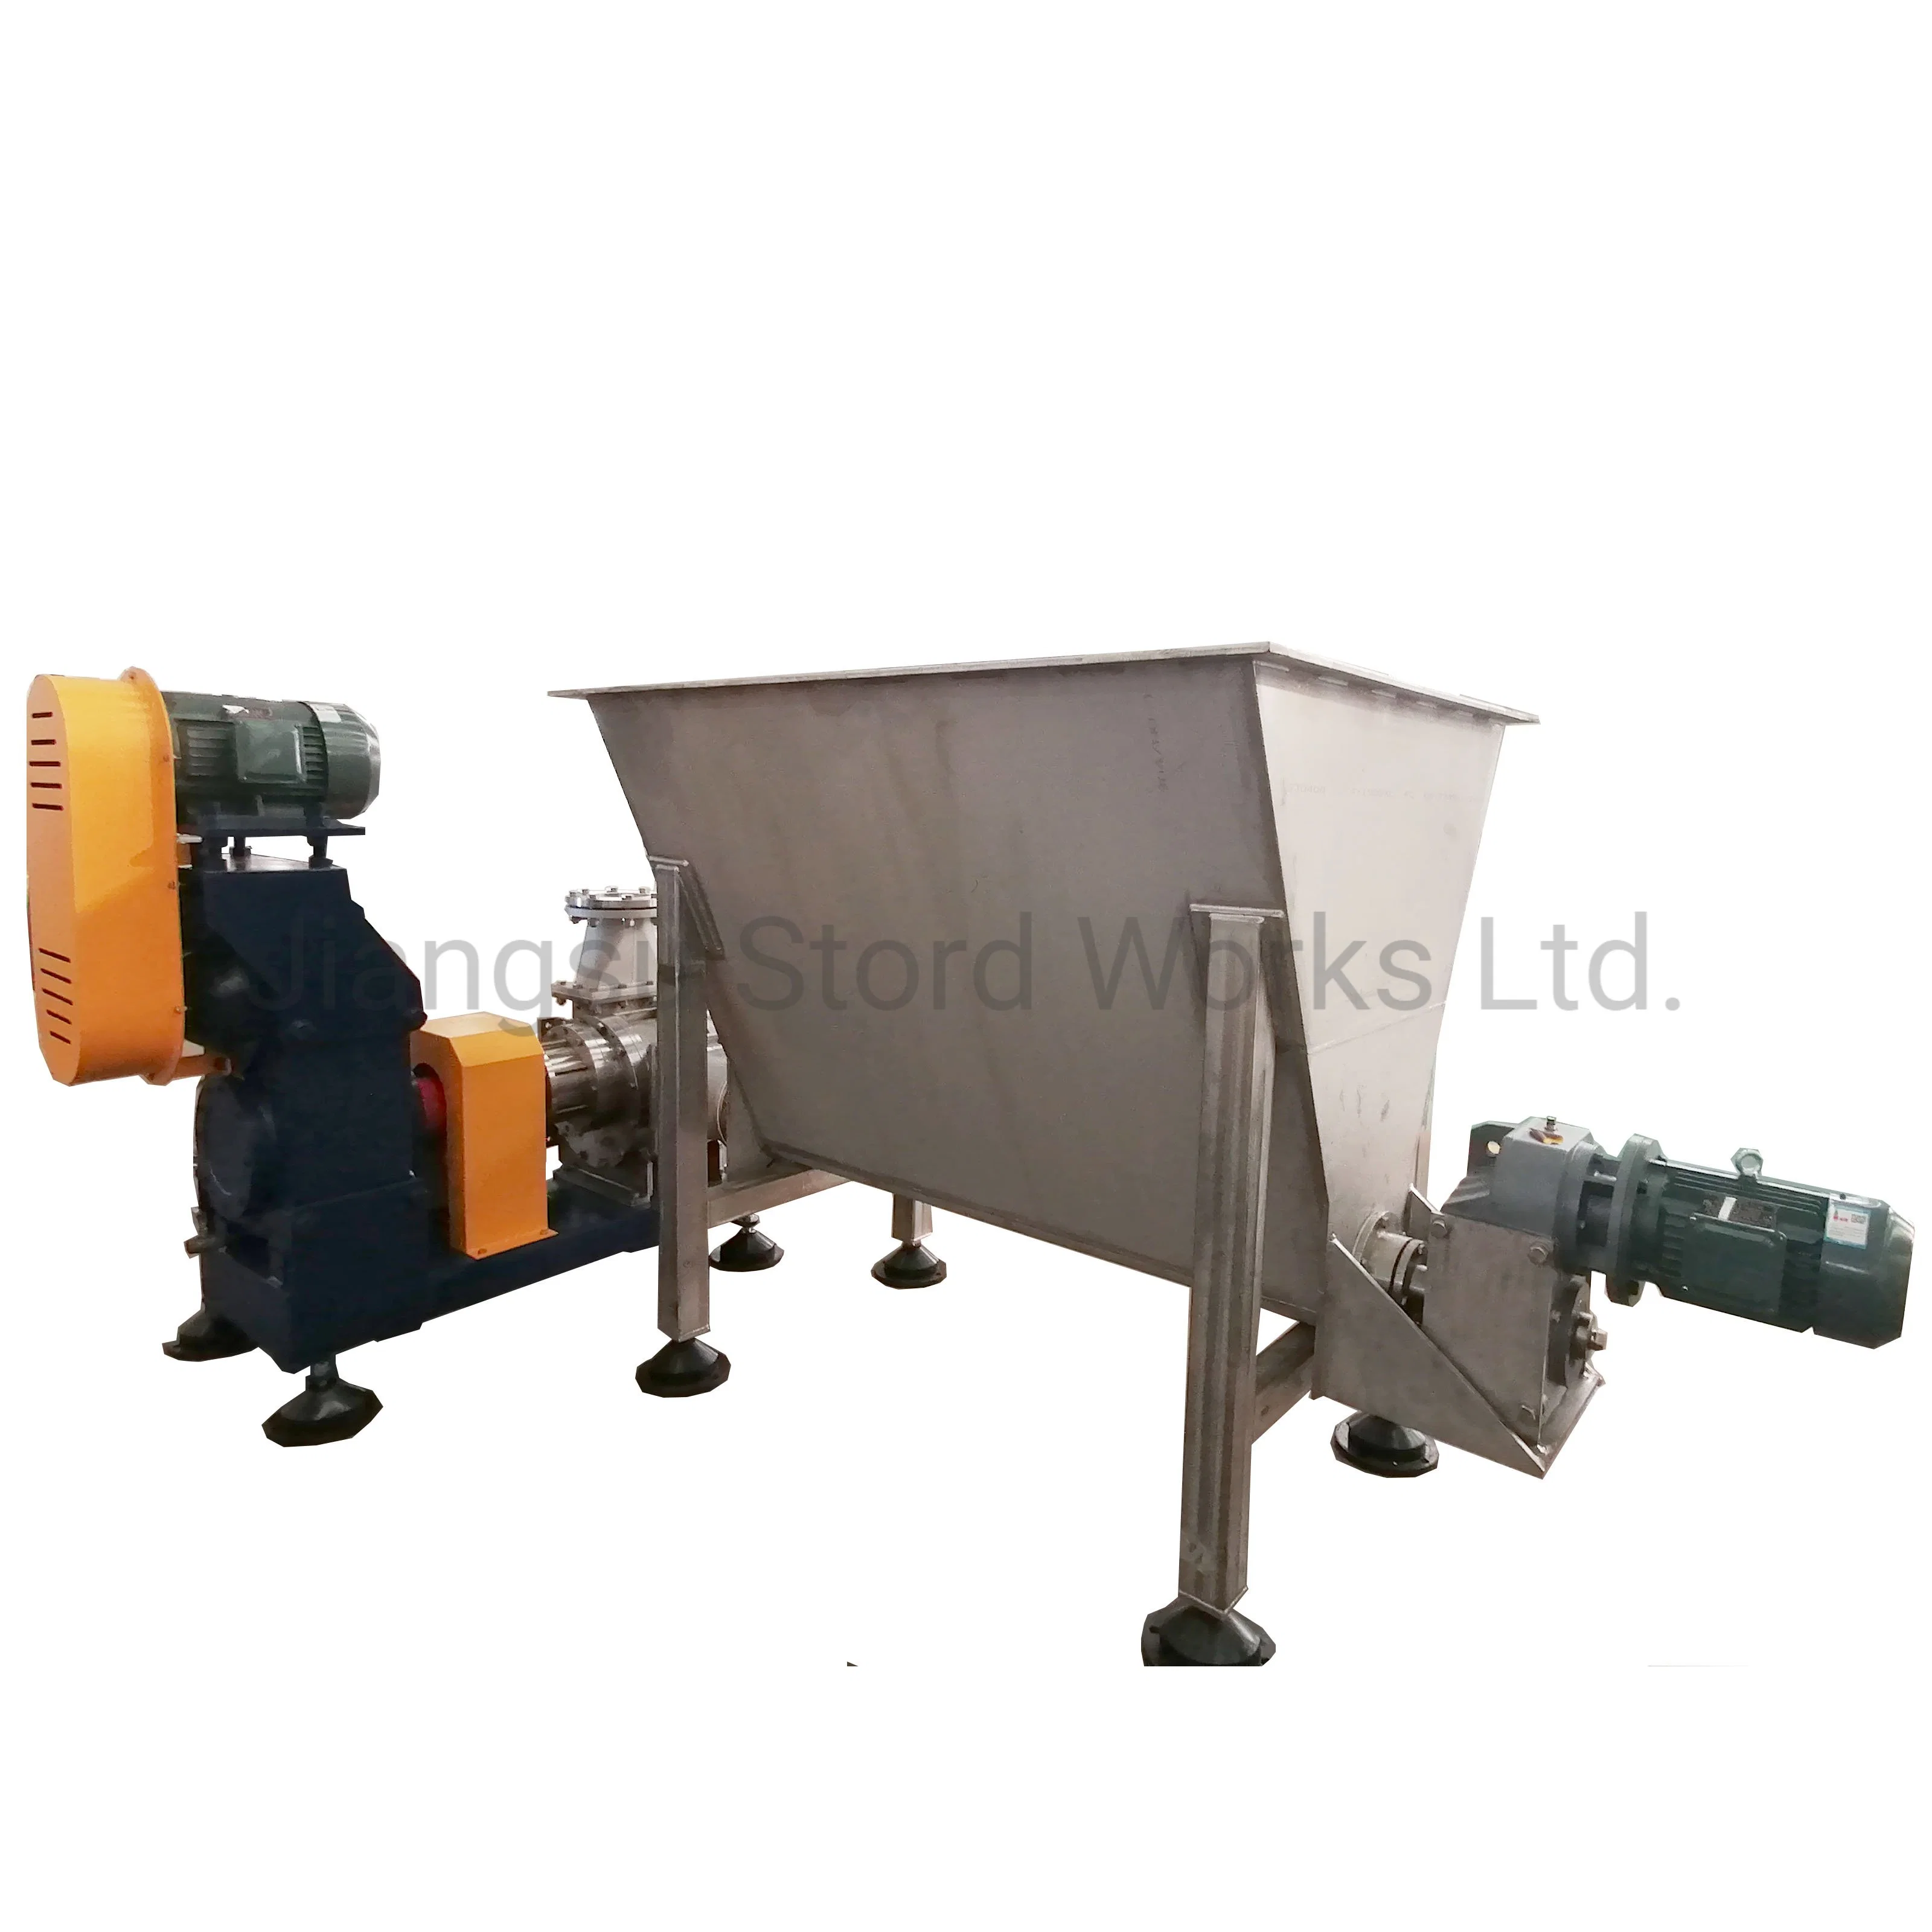 Industrial Waste Water Treatment Lamella Pump with Good Quality